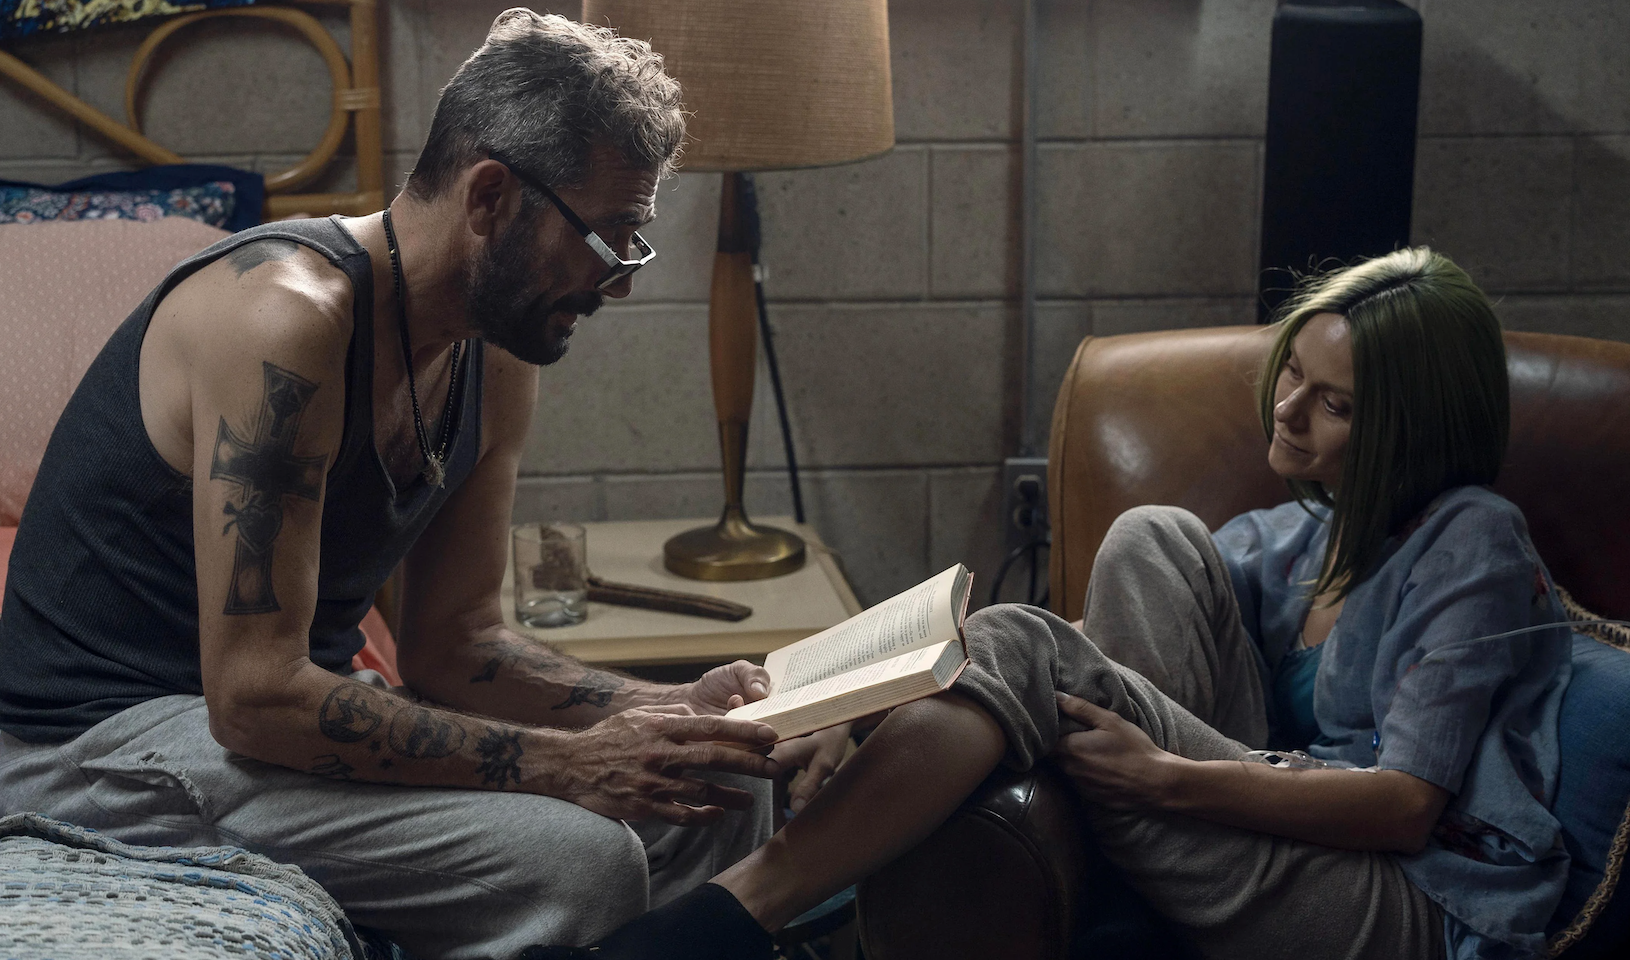 A man with tattoos and a tank top reads a book alongside a young girl in a casual setting